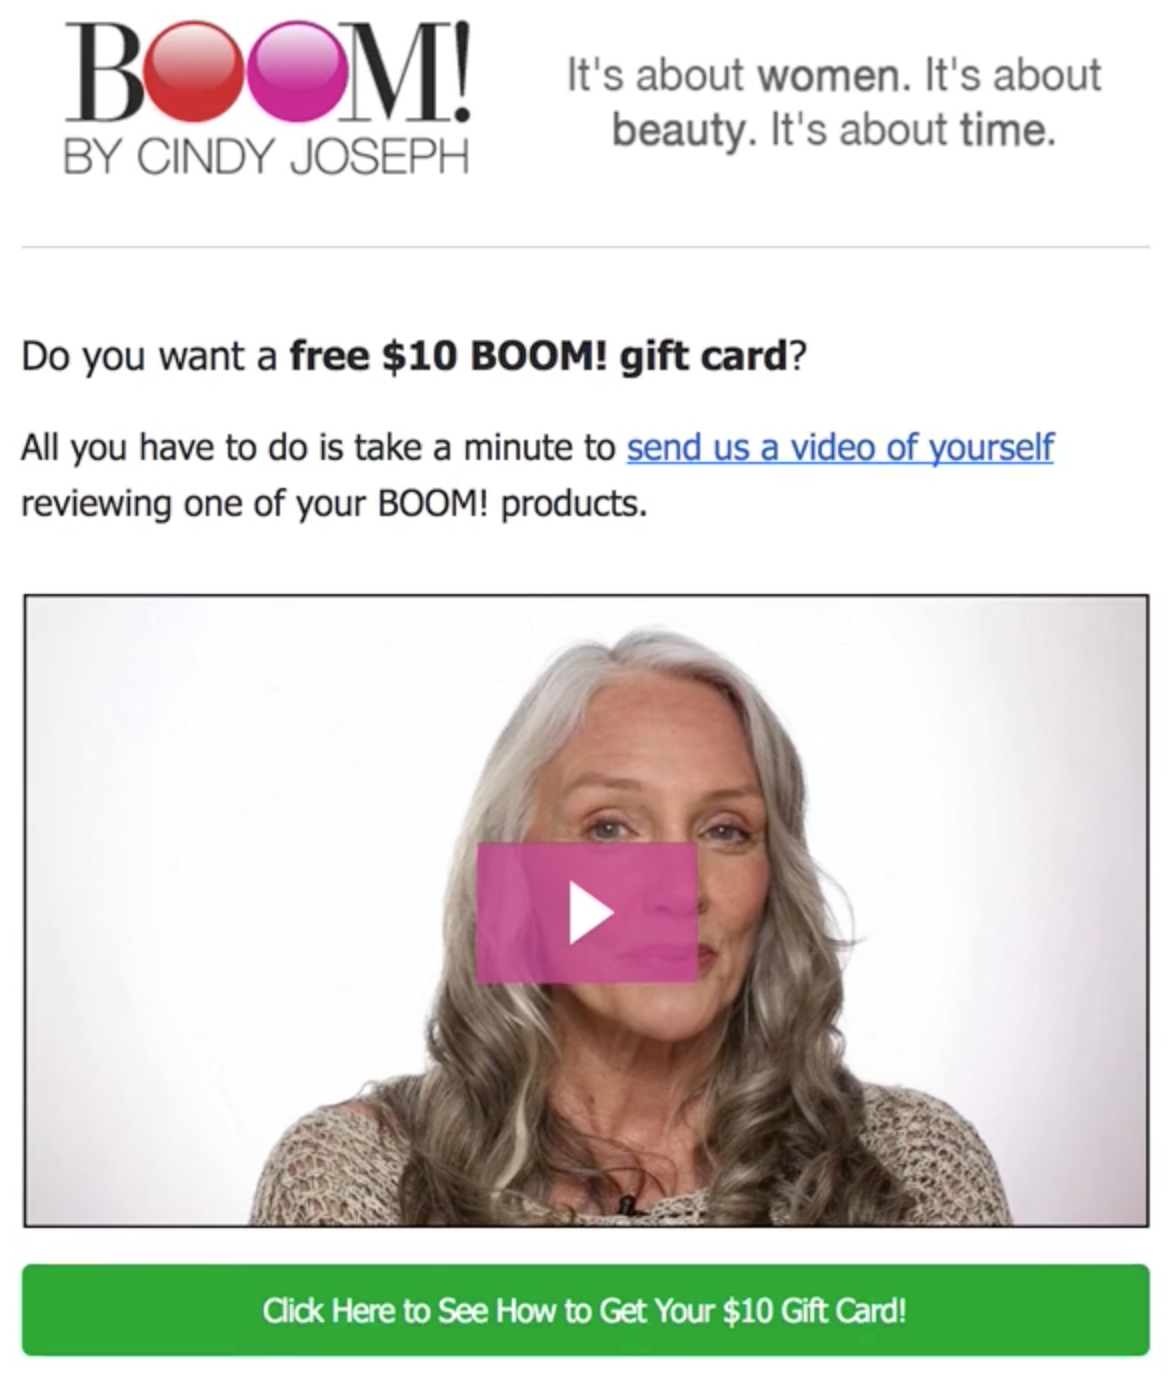 Screenshot showing a video review on BOOM! by Cindy Joseph